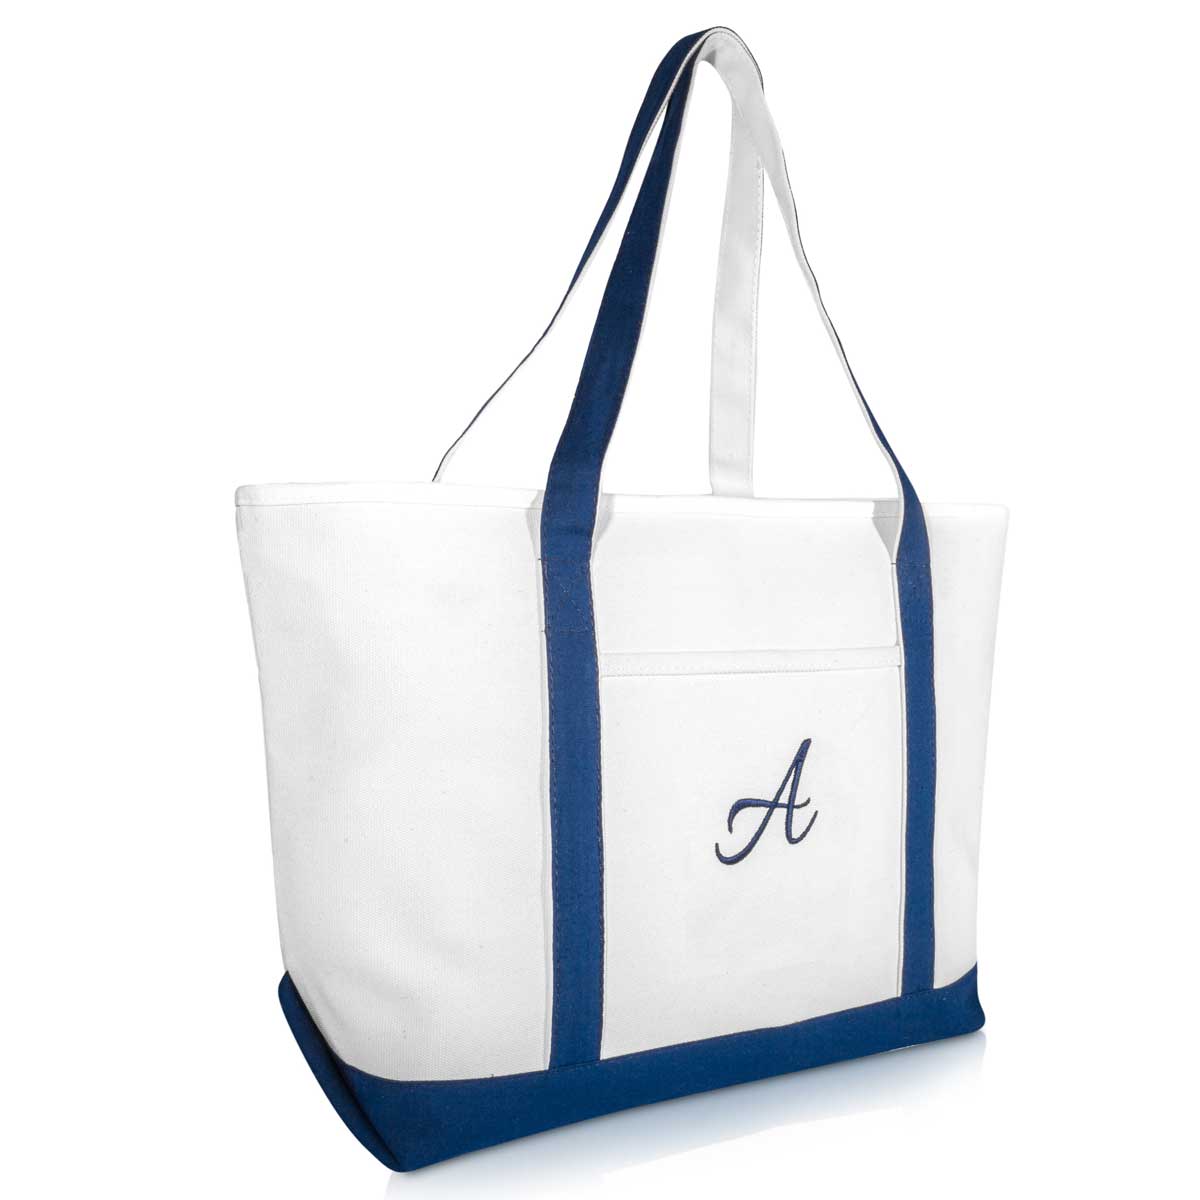 Dalix Quality Canvas Tote Bags Large Beach Bags Navy Blue Monogrammed G